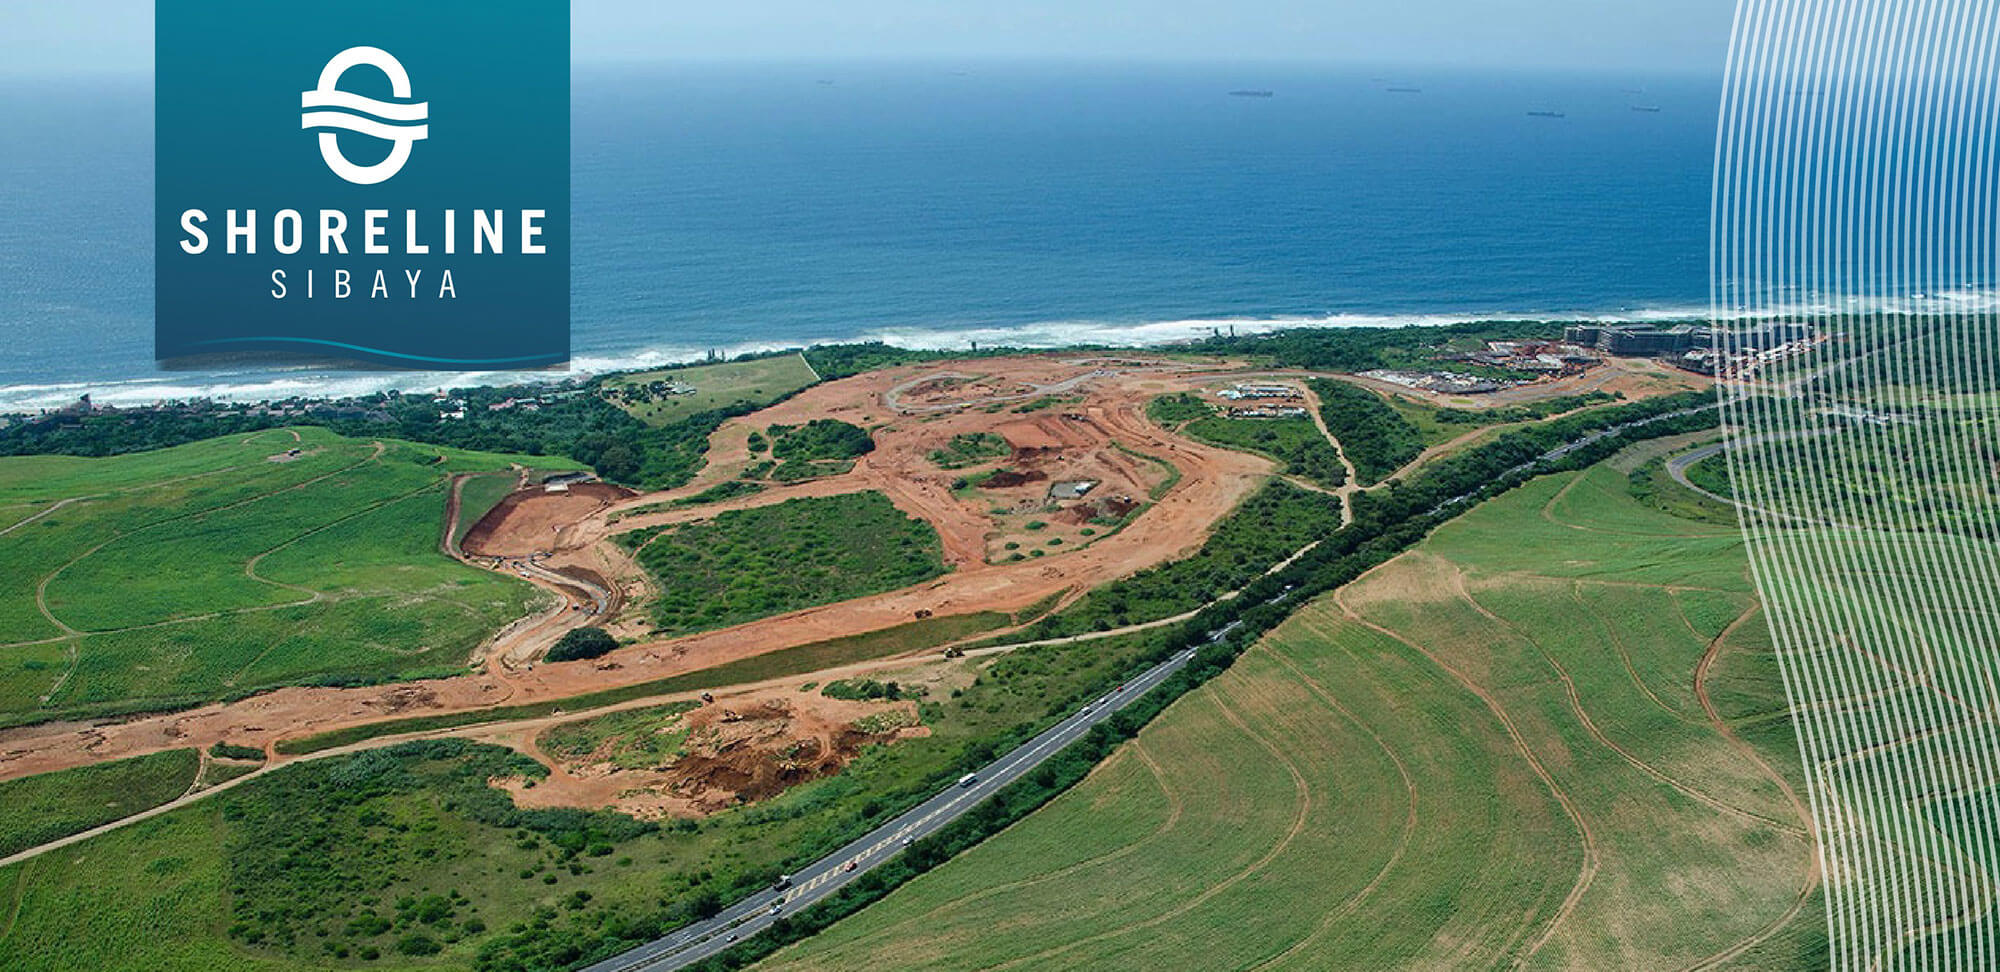 Breaking the boundaries in retirement living, Shoreline Sibaya is creating an invigorating environment for retirees. Encapsulating a resort-style feel, every day is an opportunity to create new beginnings and live a social and active coastal lifestyle within a close-knit community.